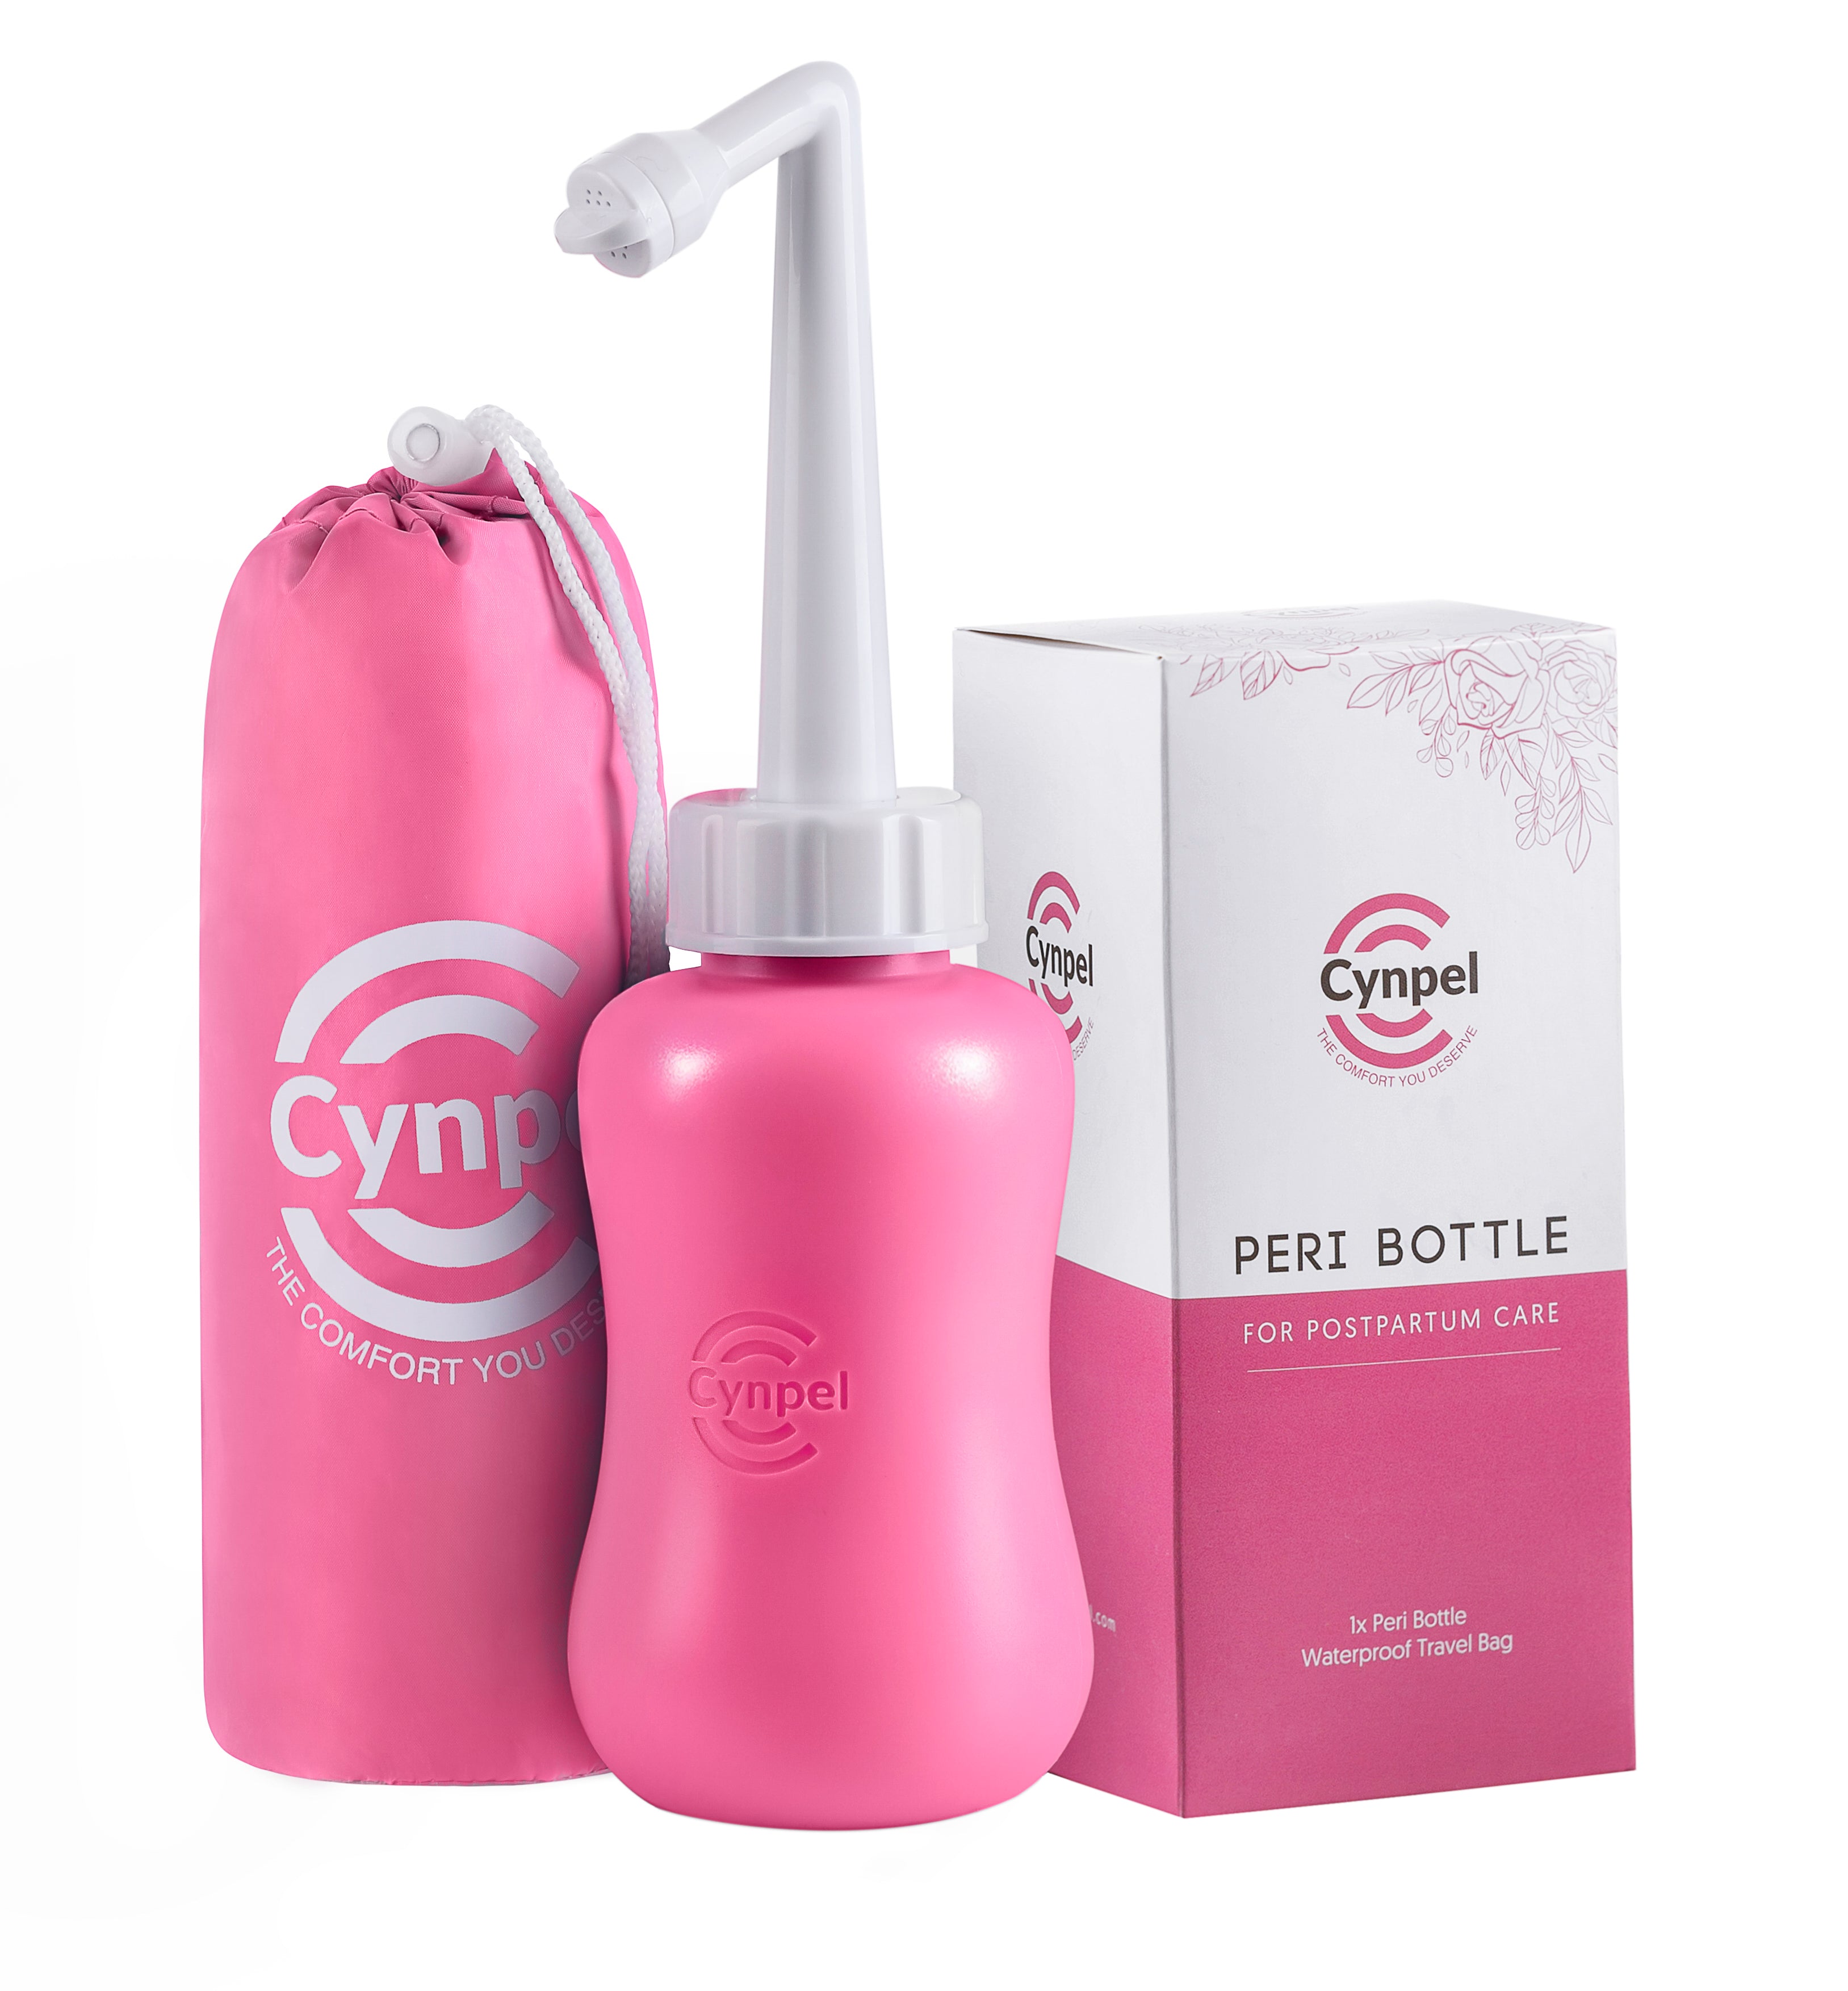 Peri Bottle For Postpartum Perineal Care – Cynpel